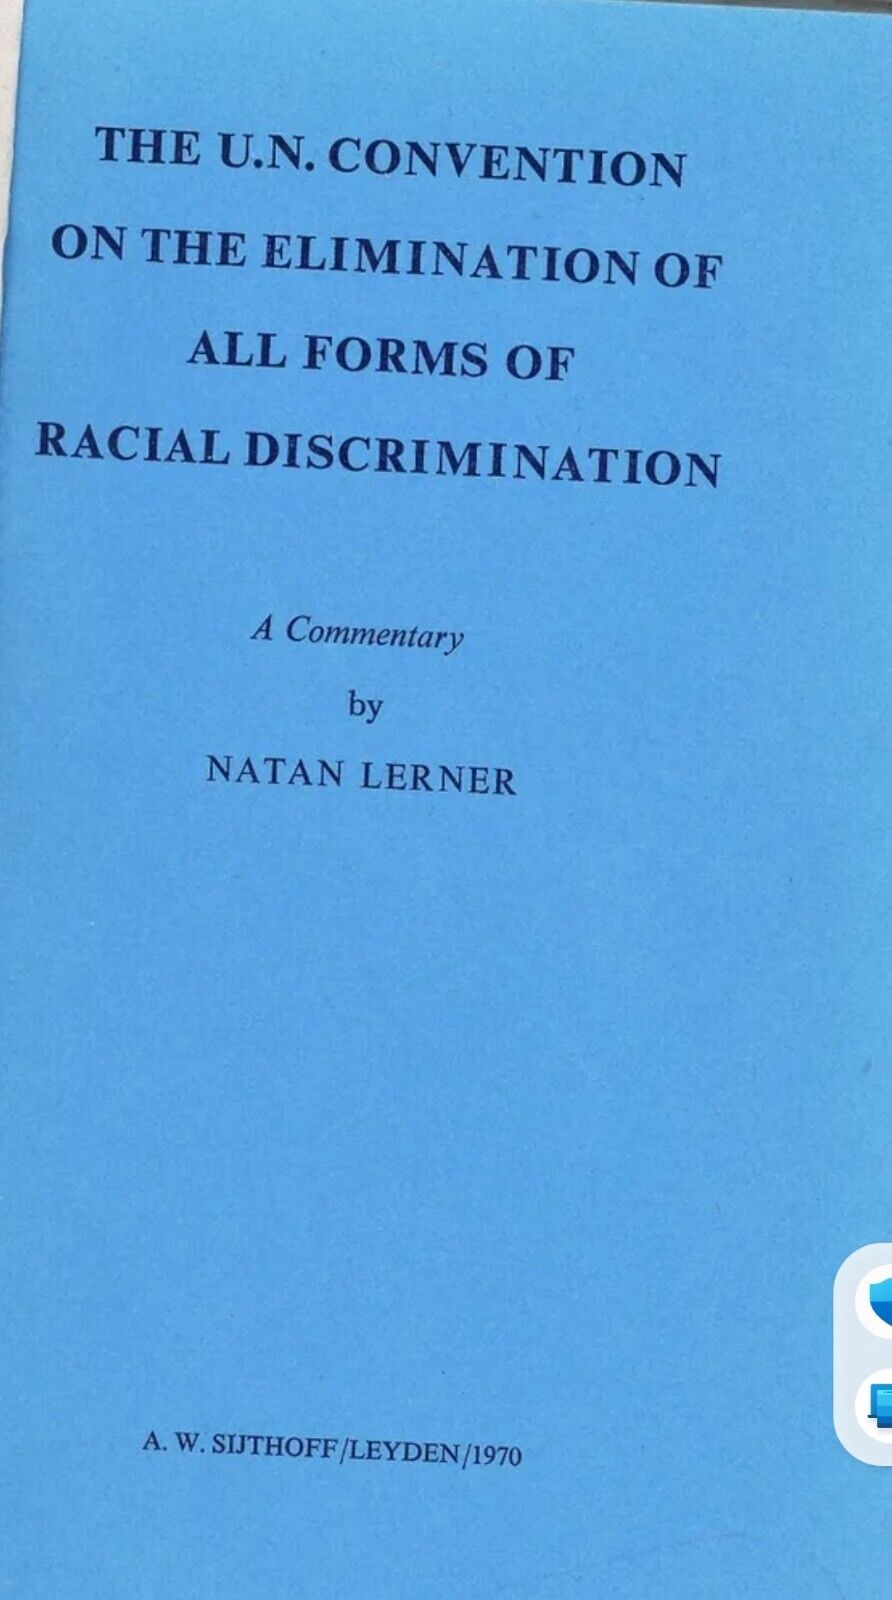 The U.N .Convention of the Elimination of all forms of Racial Discrimination 